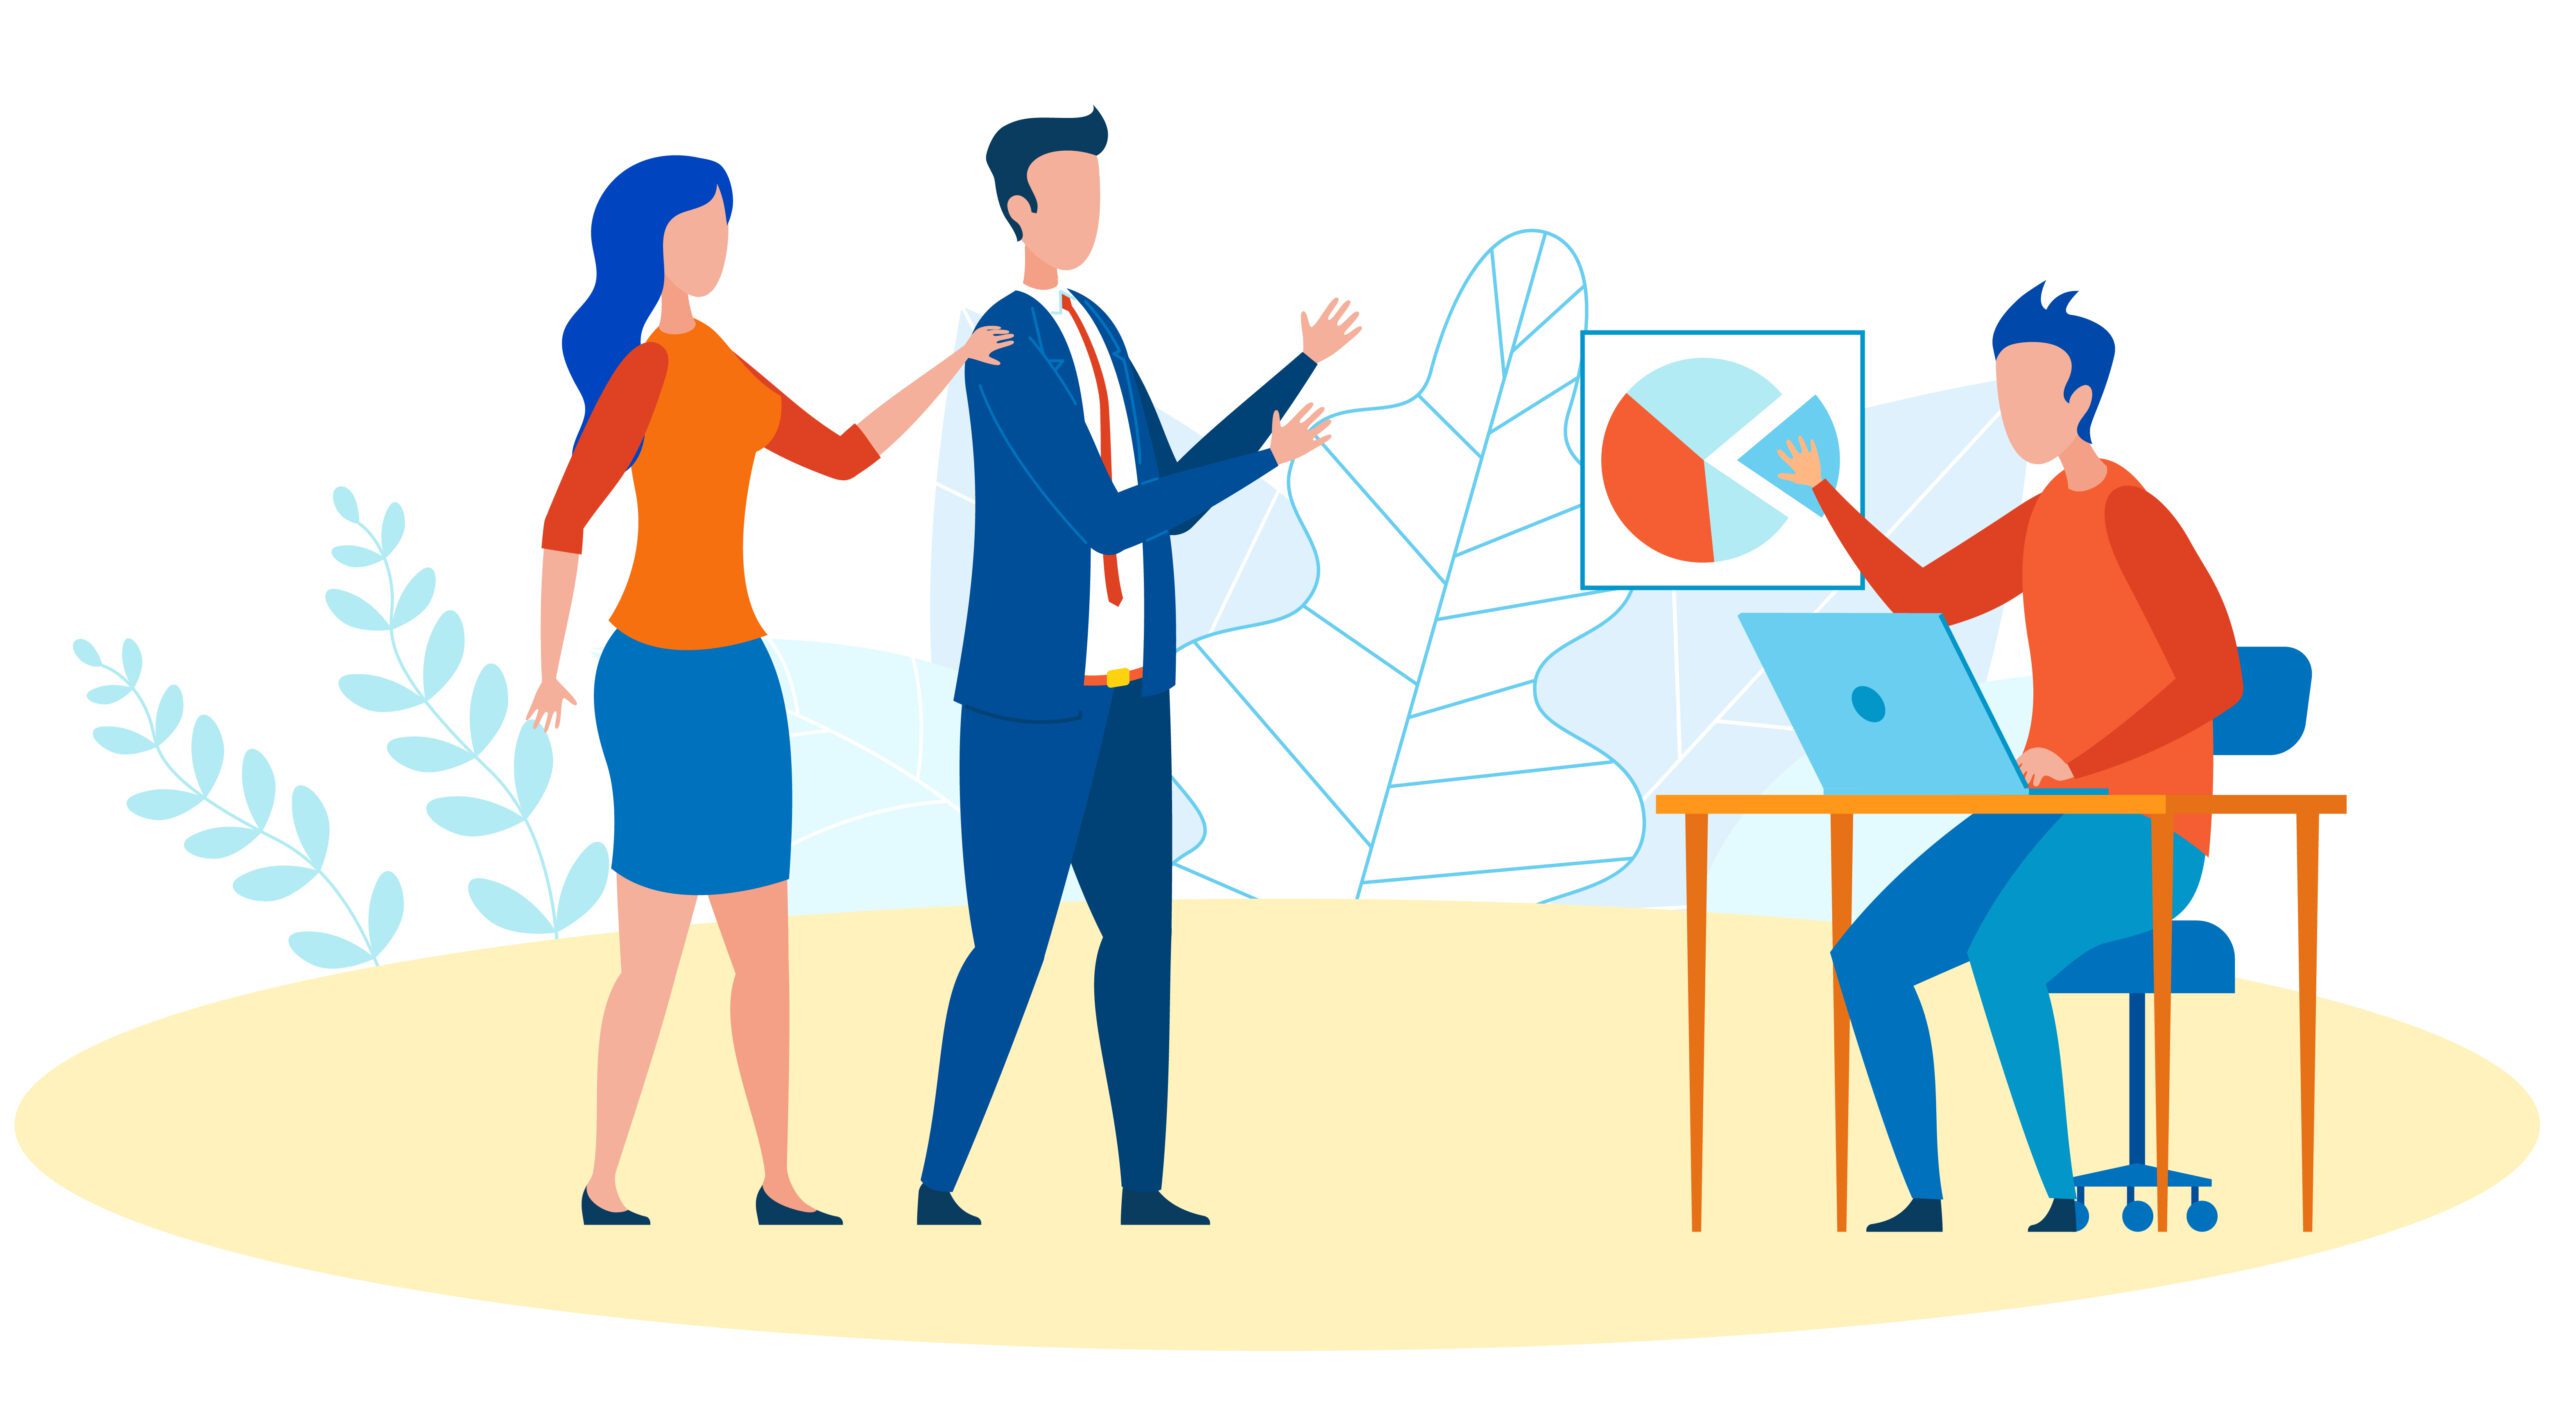 IT Department Worker Behind Desk Flat Illustration. Human Resources Department Work Cartoon. Colleagues Having Casual Conversation. Workplace Relationship, Confrontation. Boss and Employee